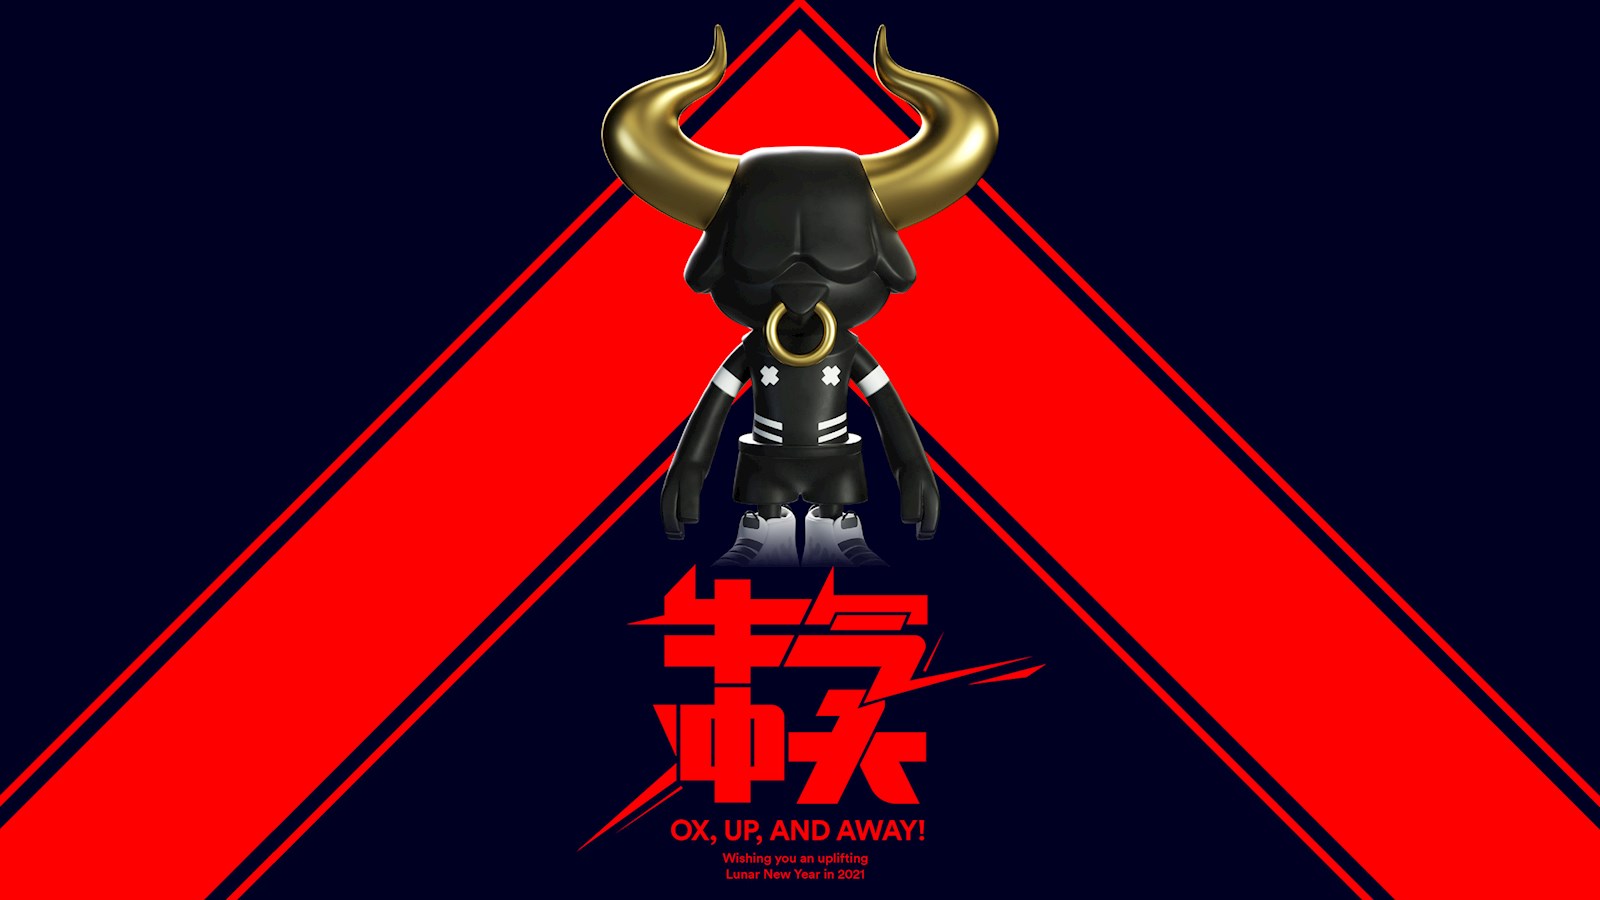 Lunar New Year 2021 - Year of the Ox